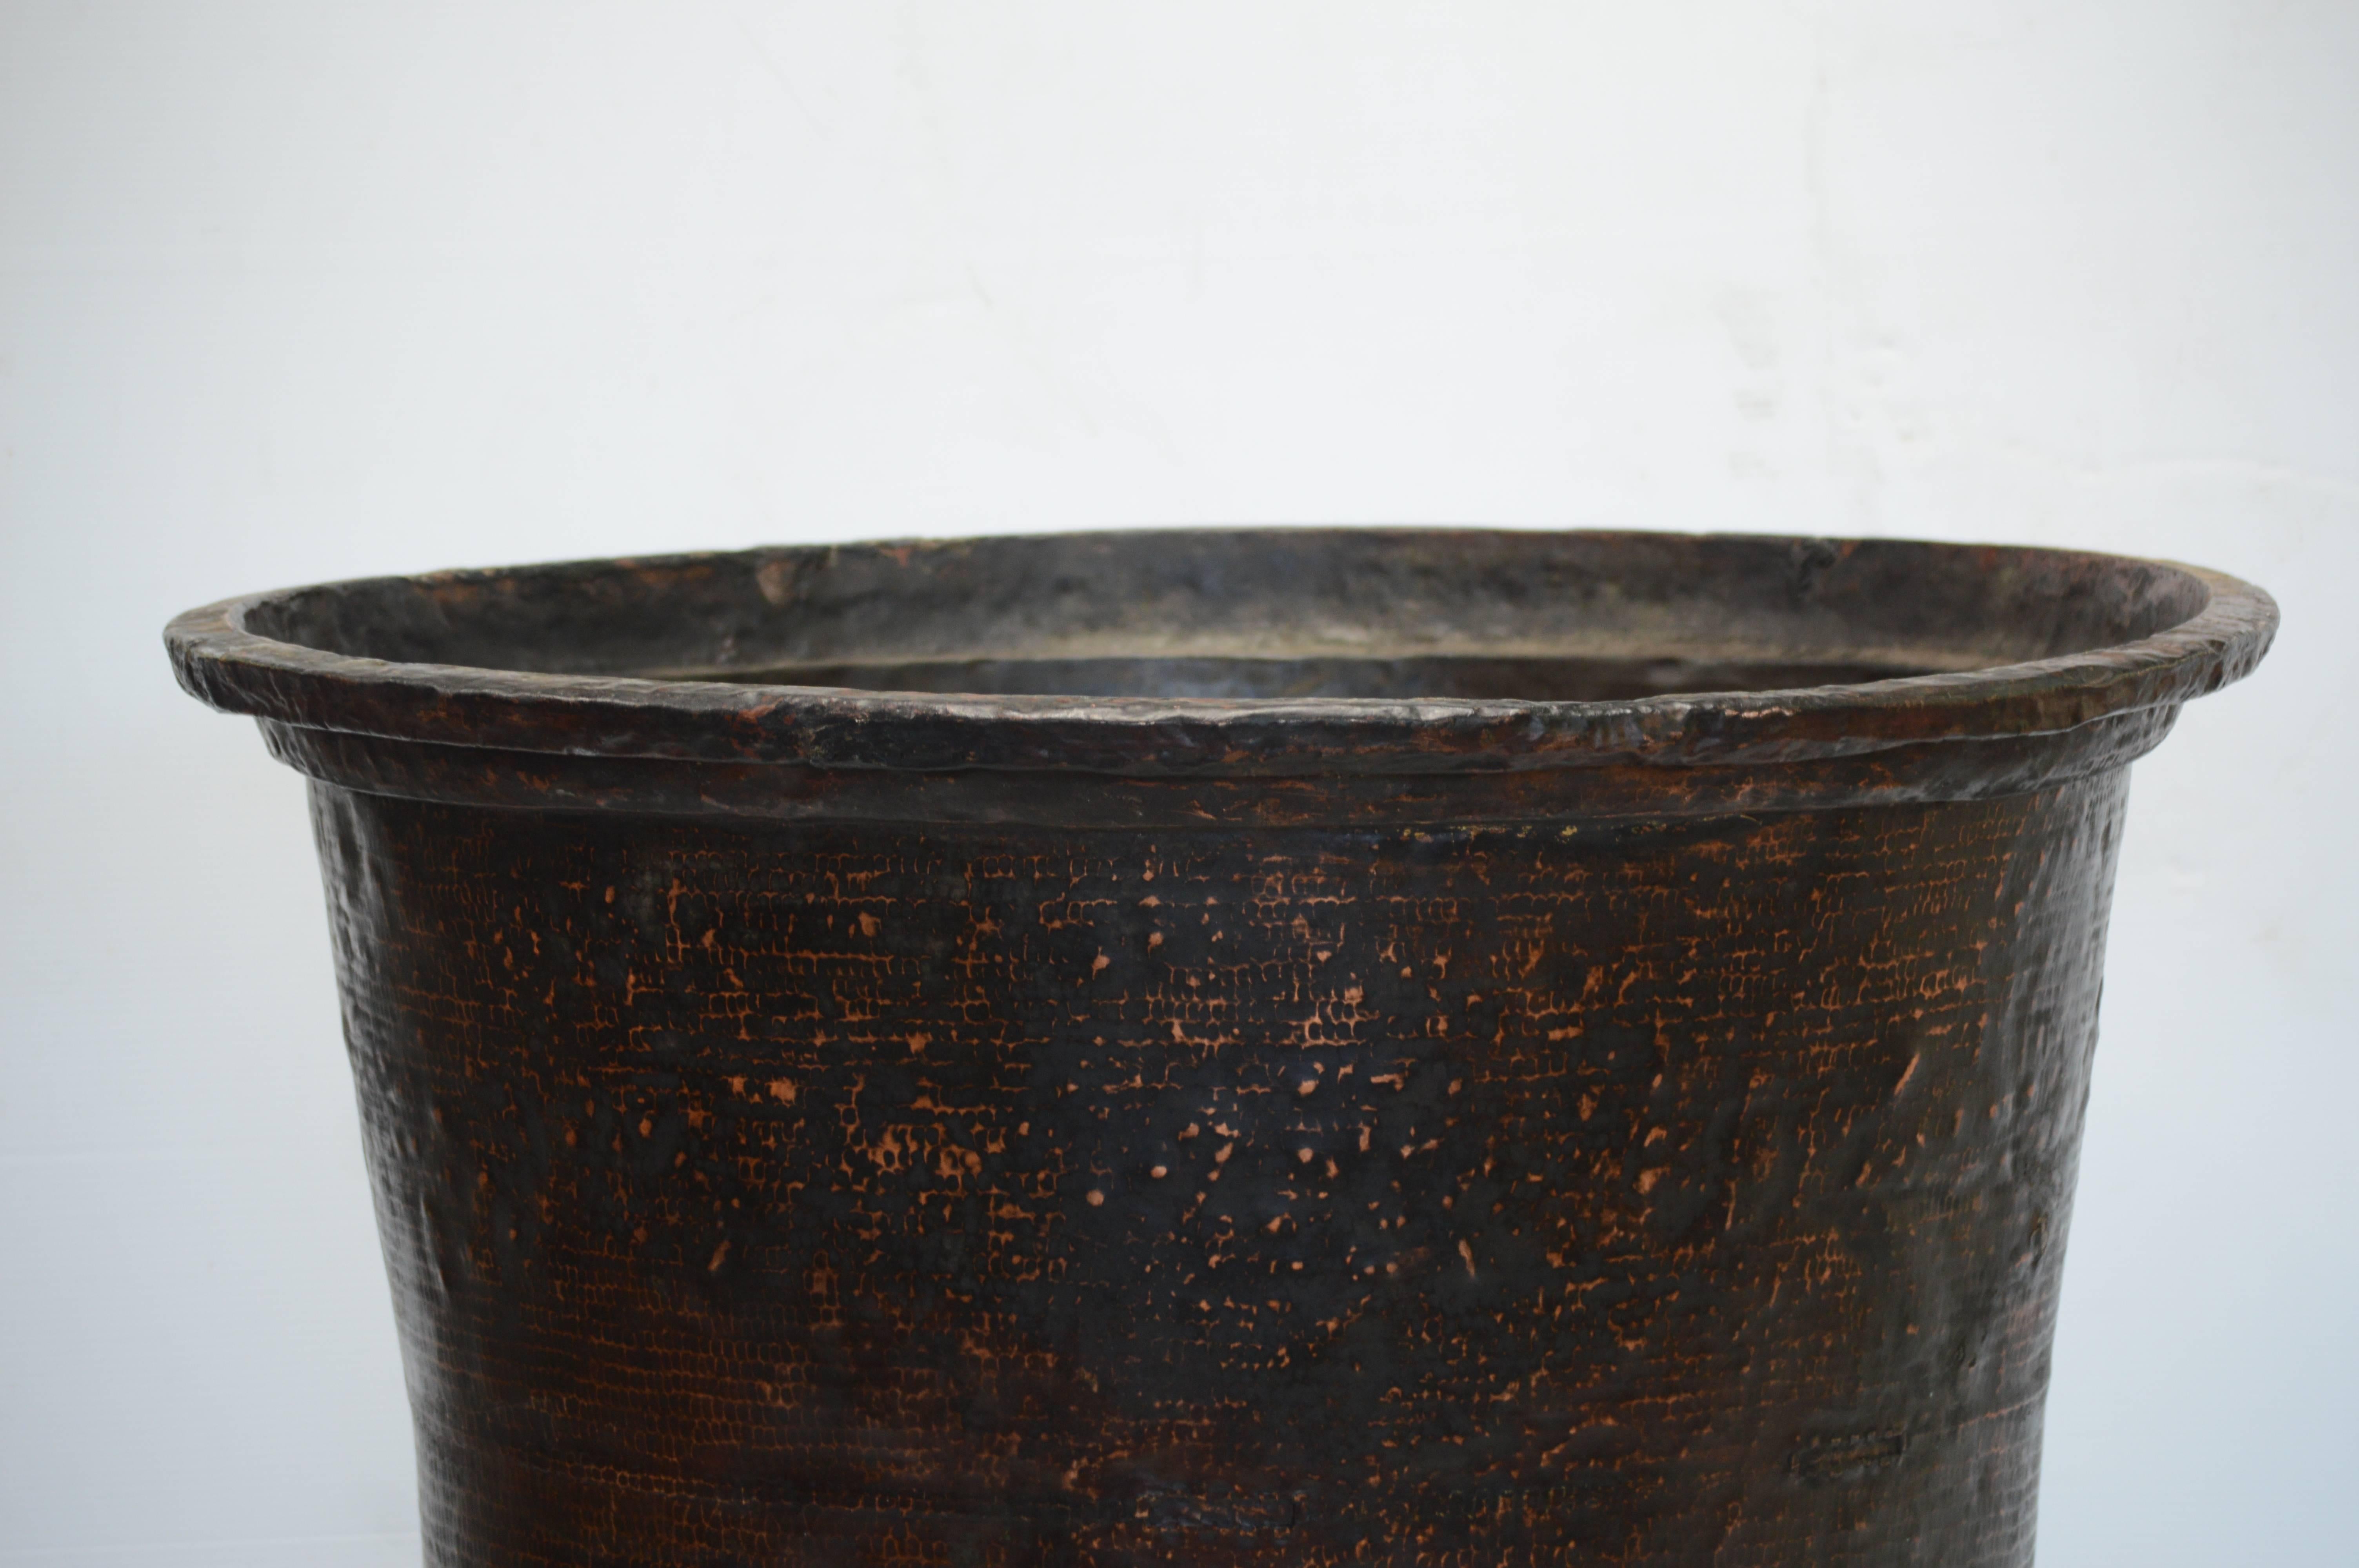 Antique vessel from Batik workshop. Handmade copper with patina of age and wear.